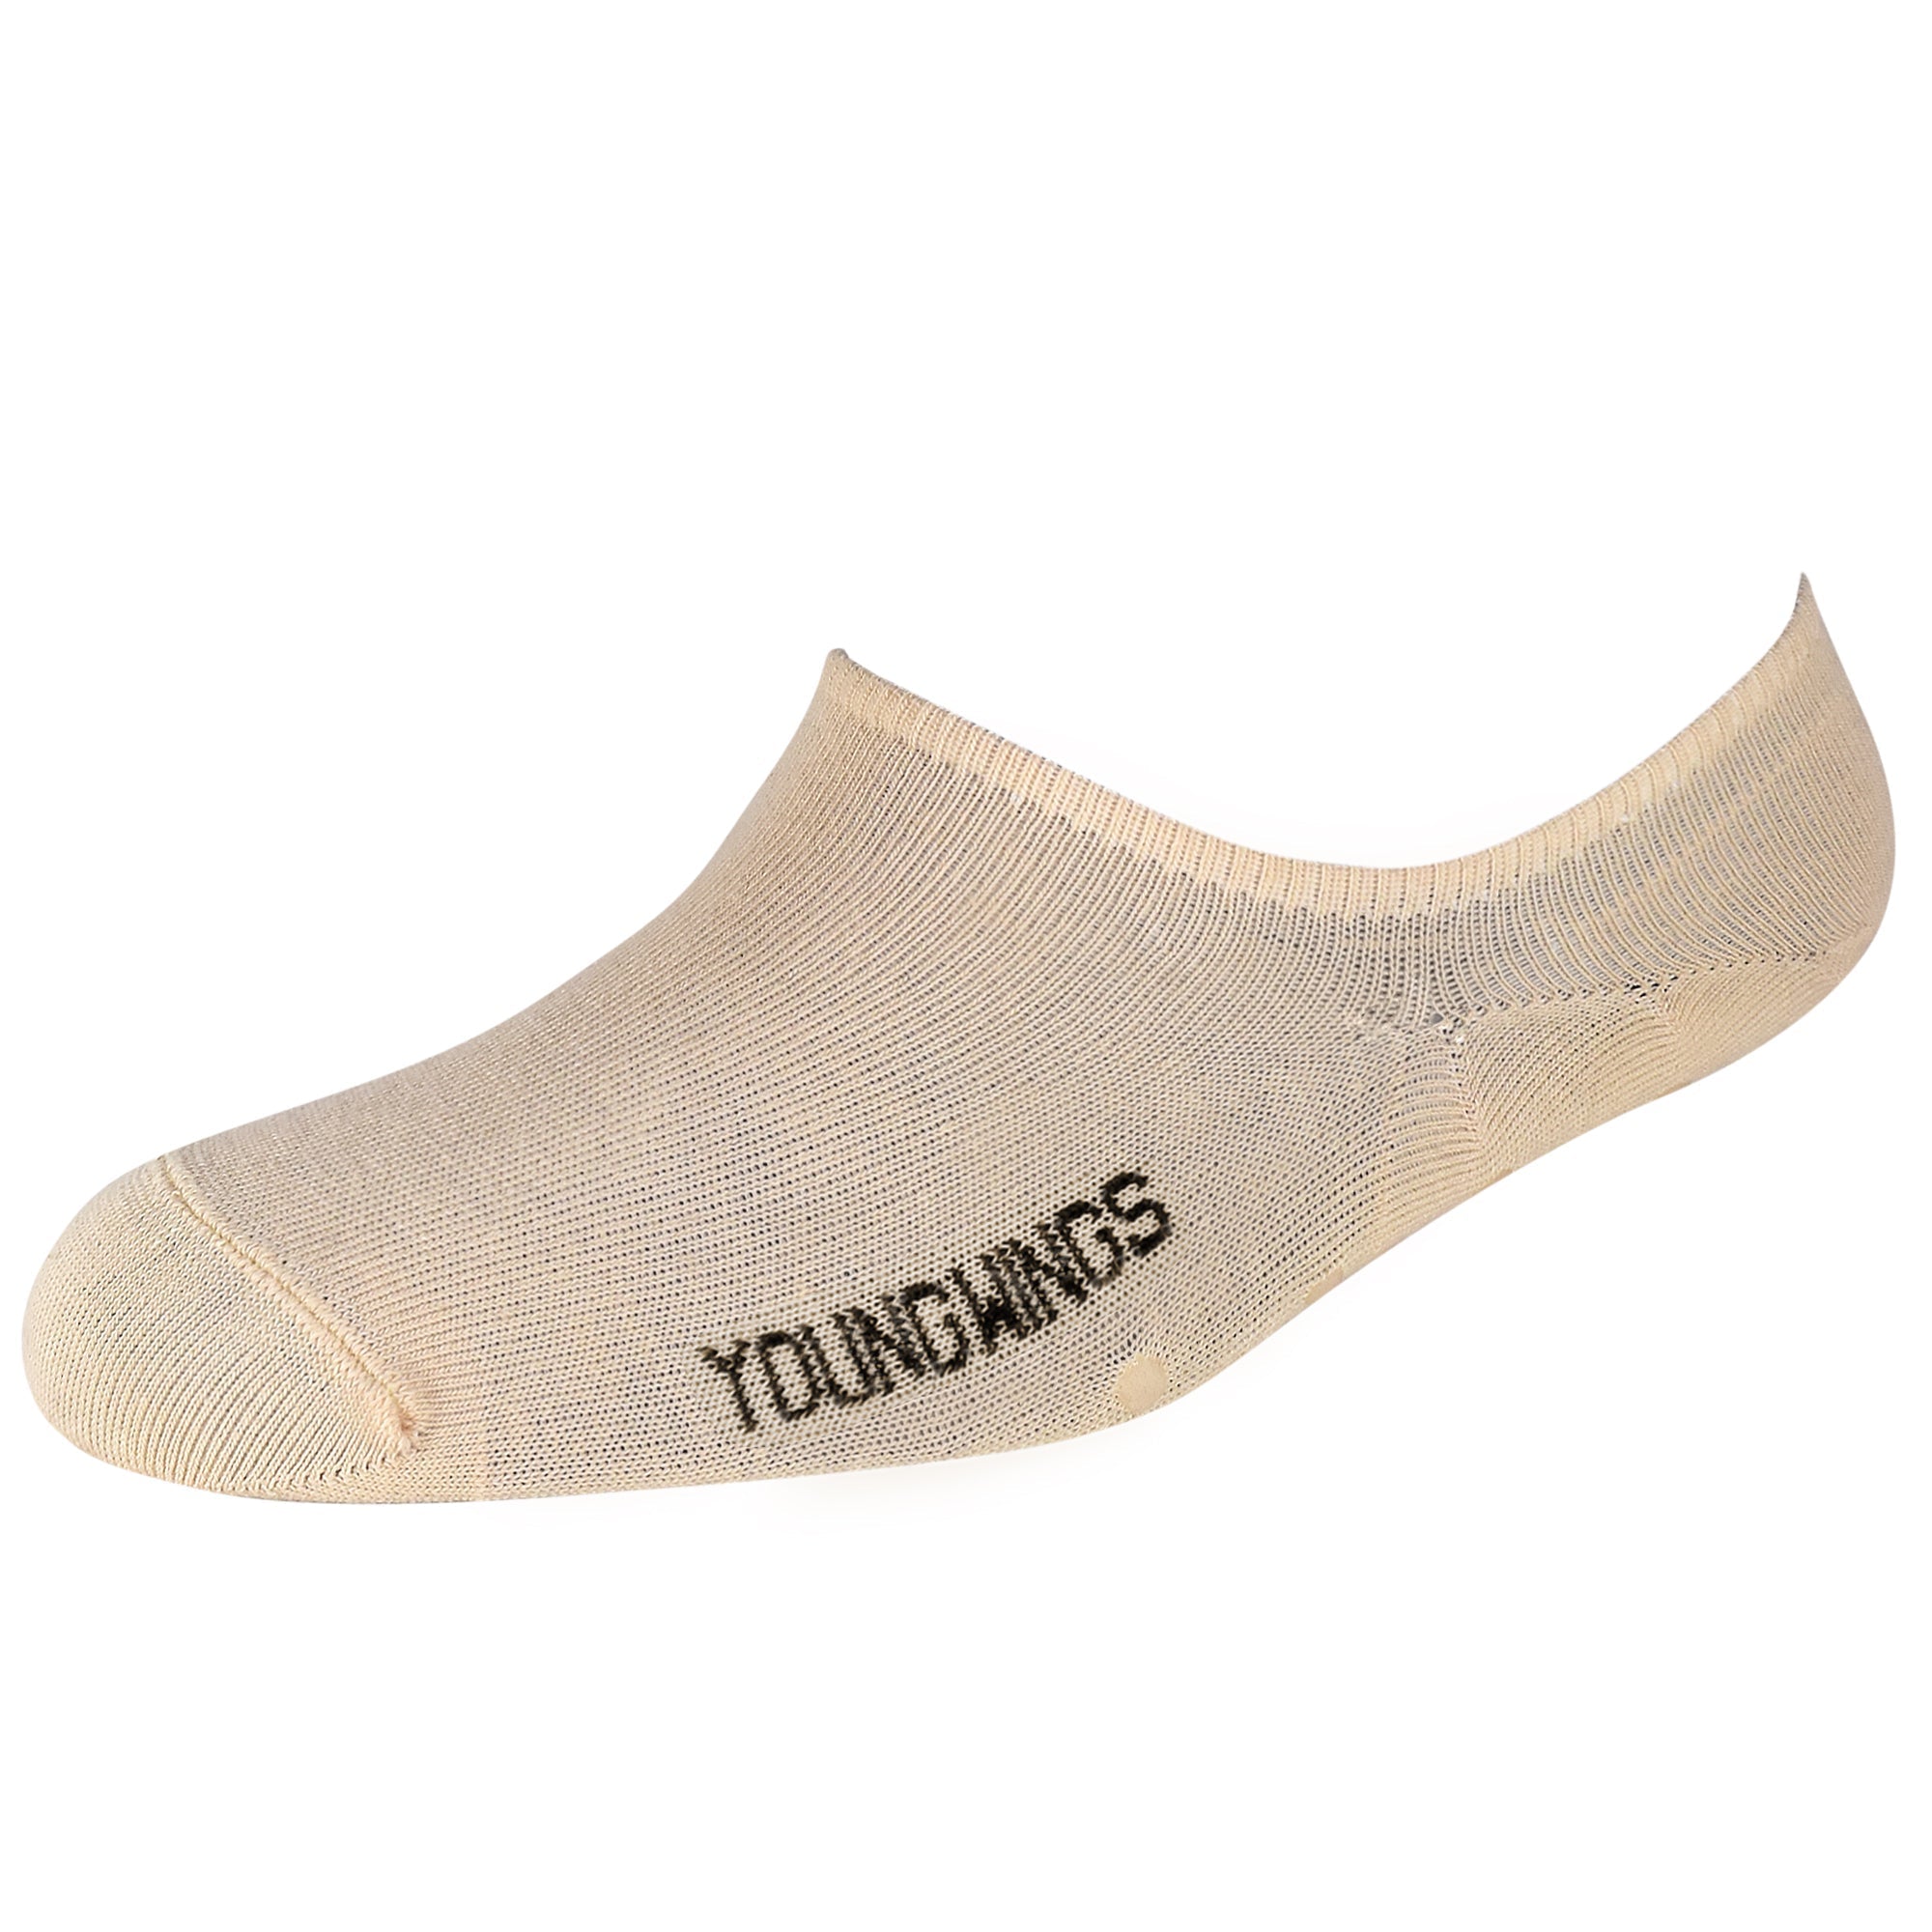 Young Wings Anti-Slip Unisex Home/Yoga Cotton No-Show Socks - (Pack of 2 Pairs) - Style code: M2-135